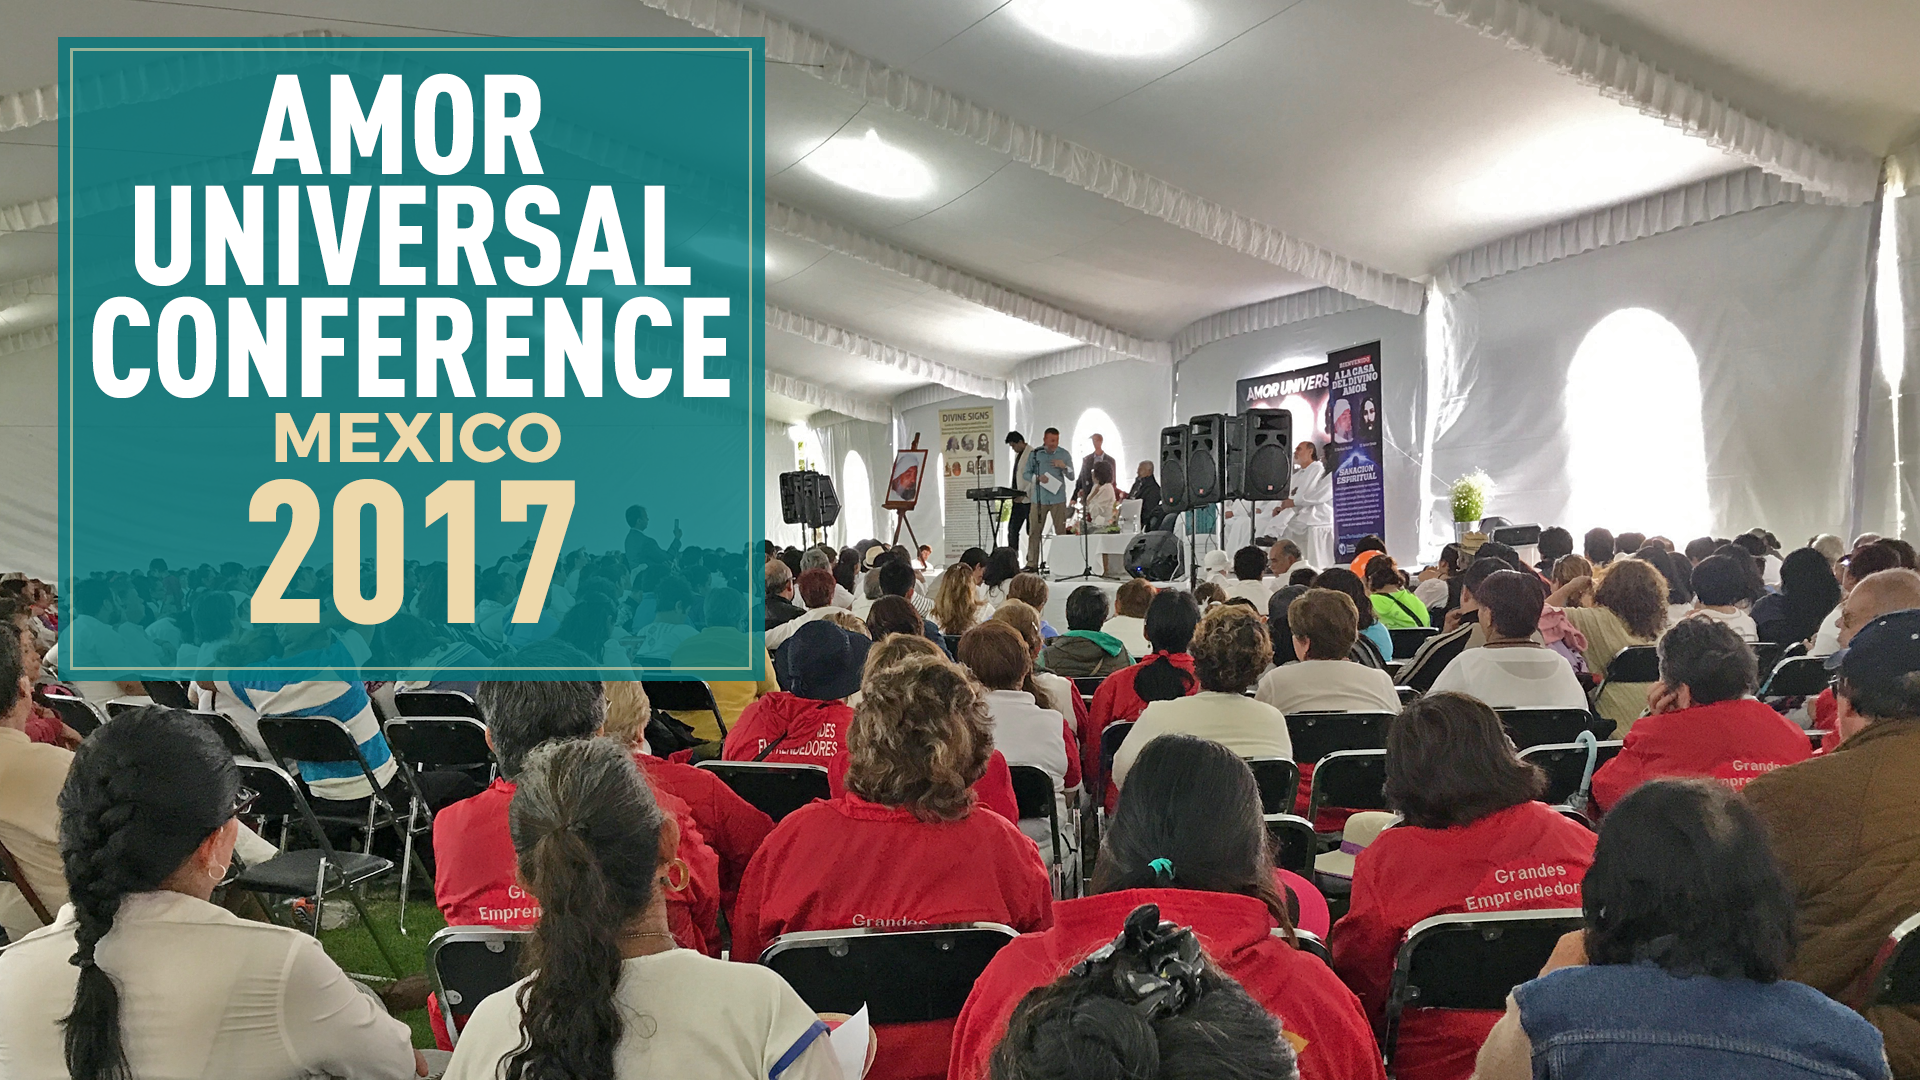 Amor Universal Conference in Mexico City, 2017!